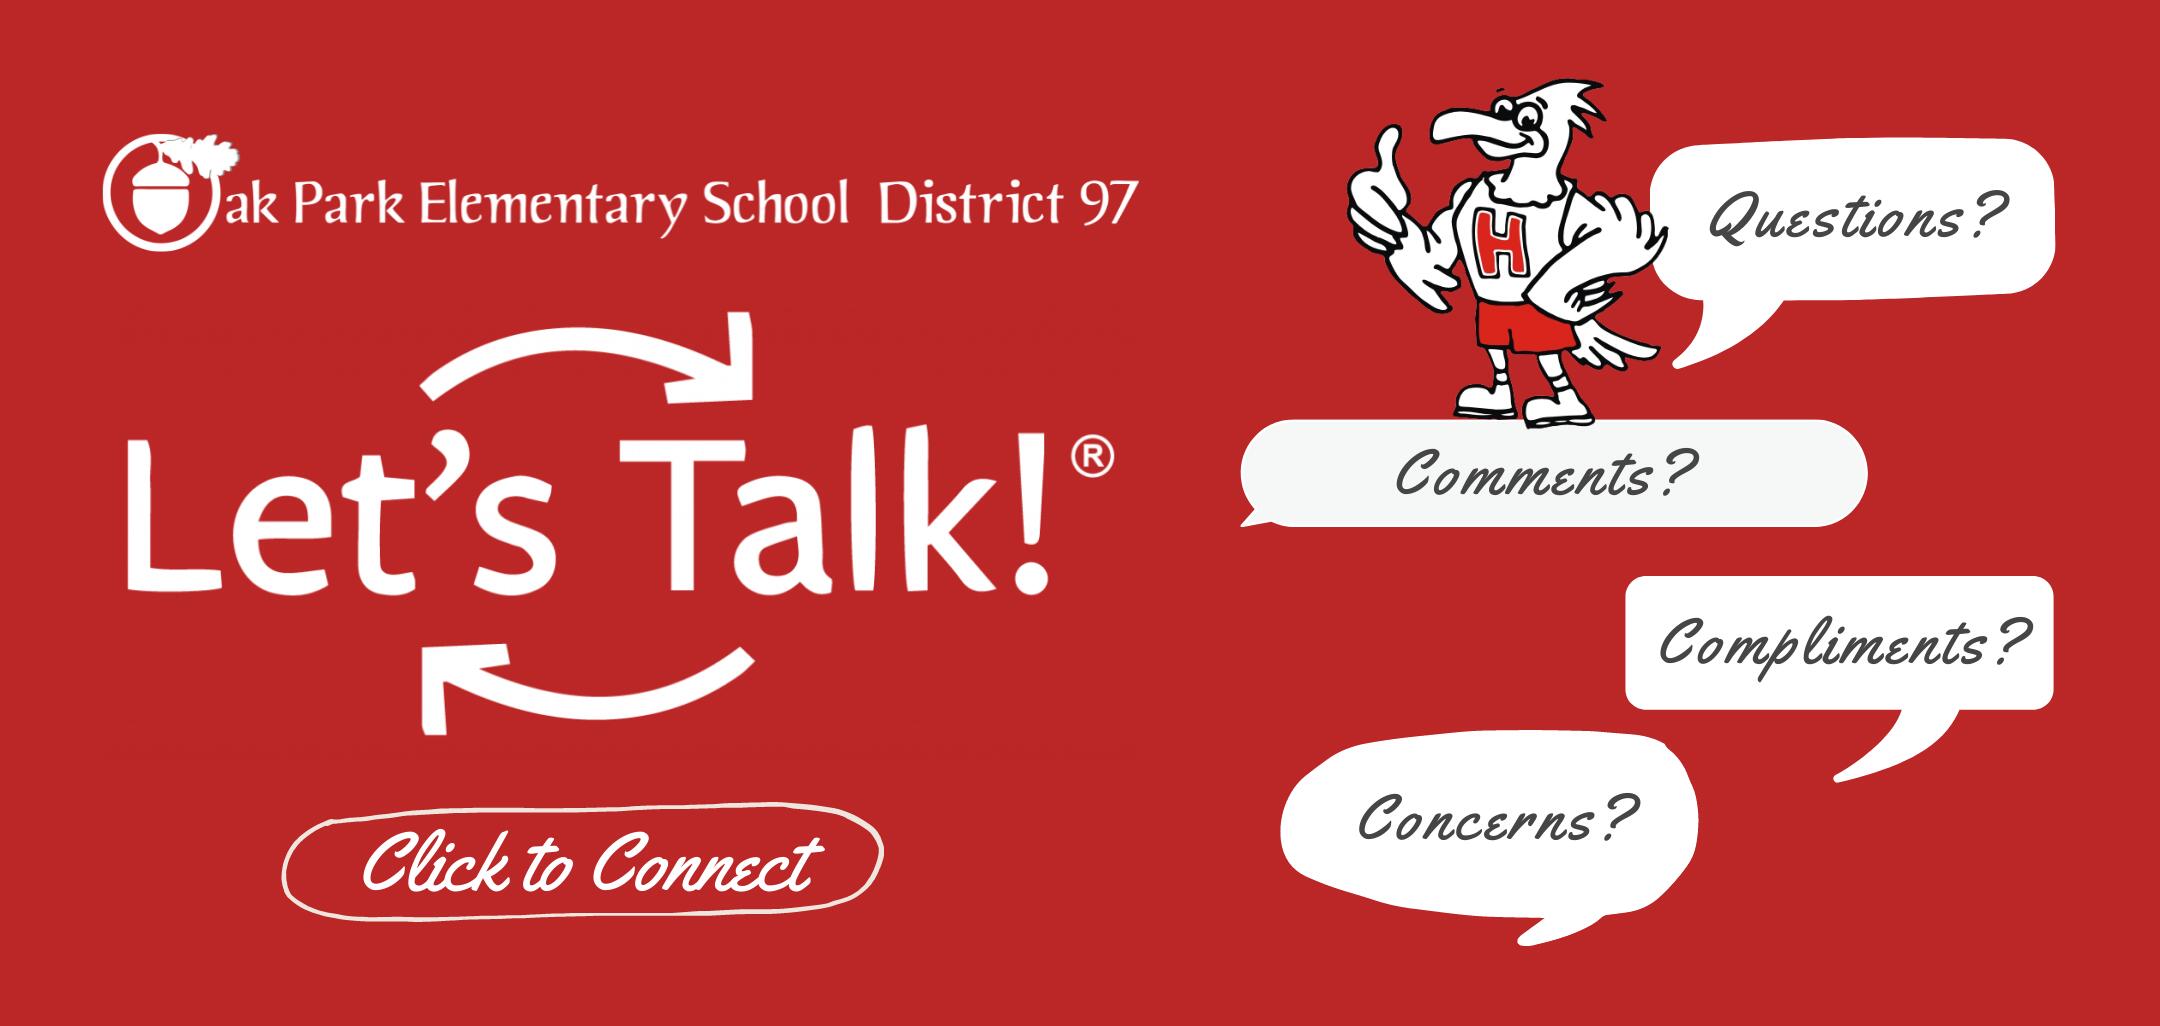 Click to share questions, concerns or compliments via Let's Talk!